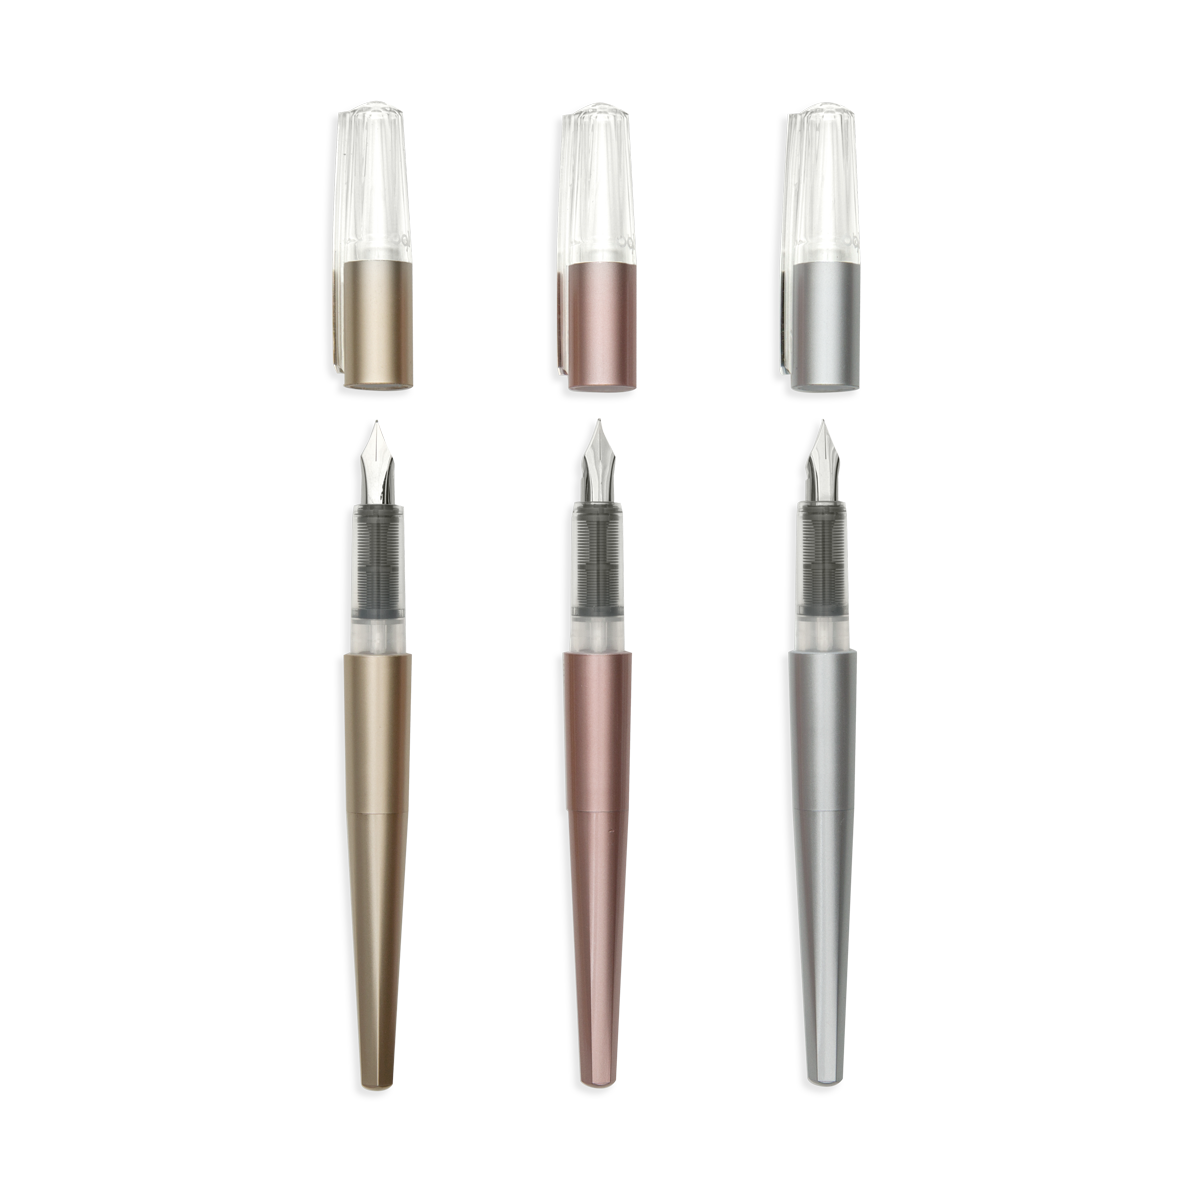 3 Modern Script Fountain Pens with caps removed